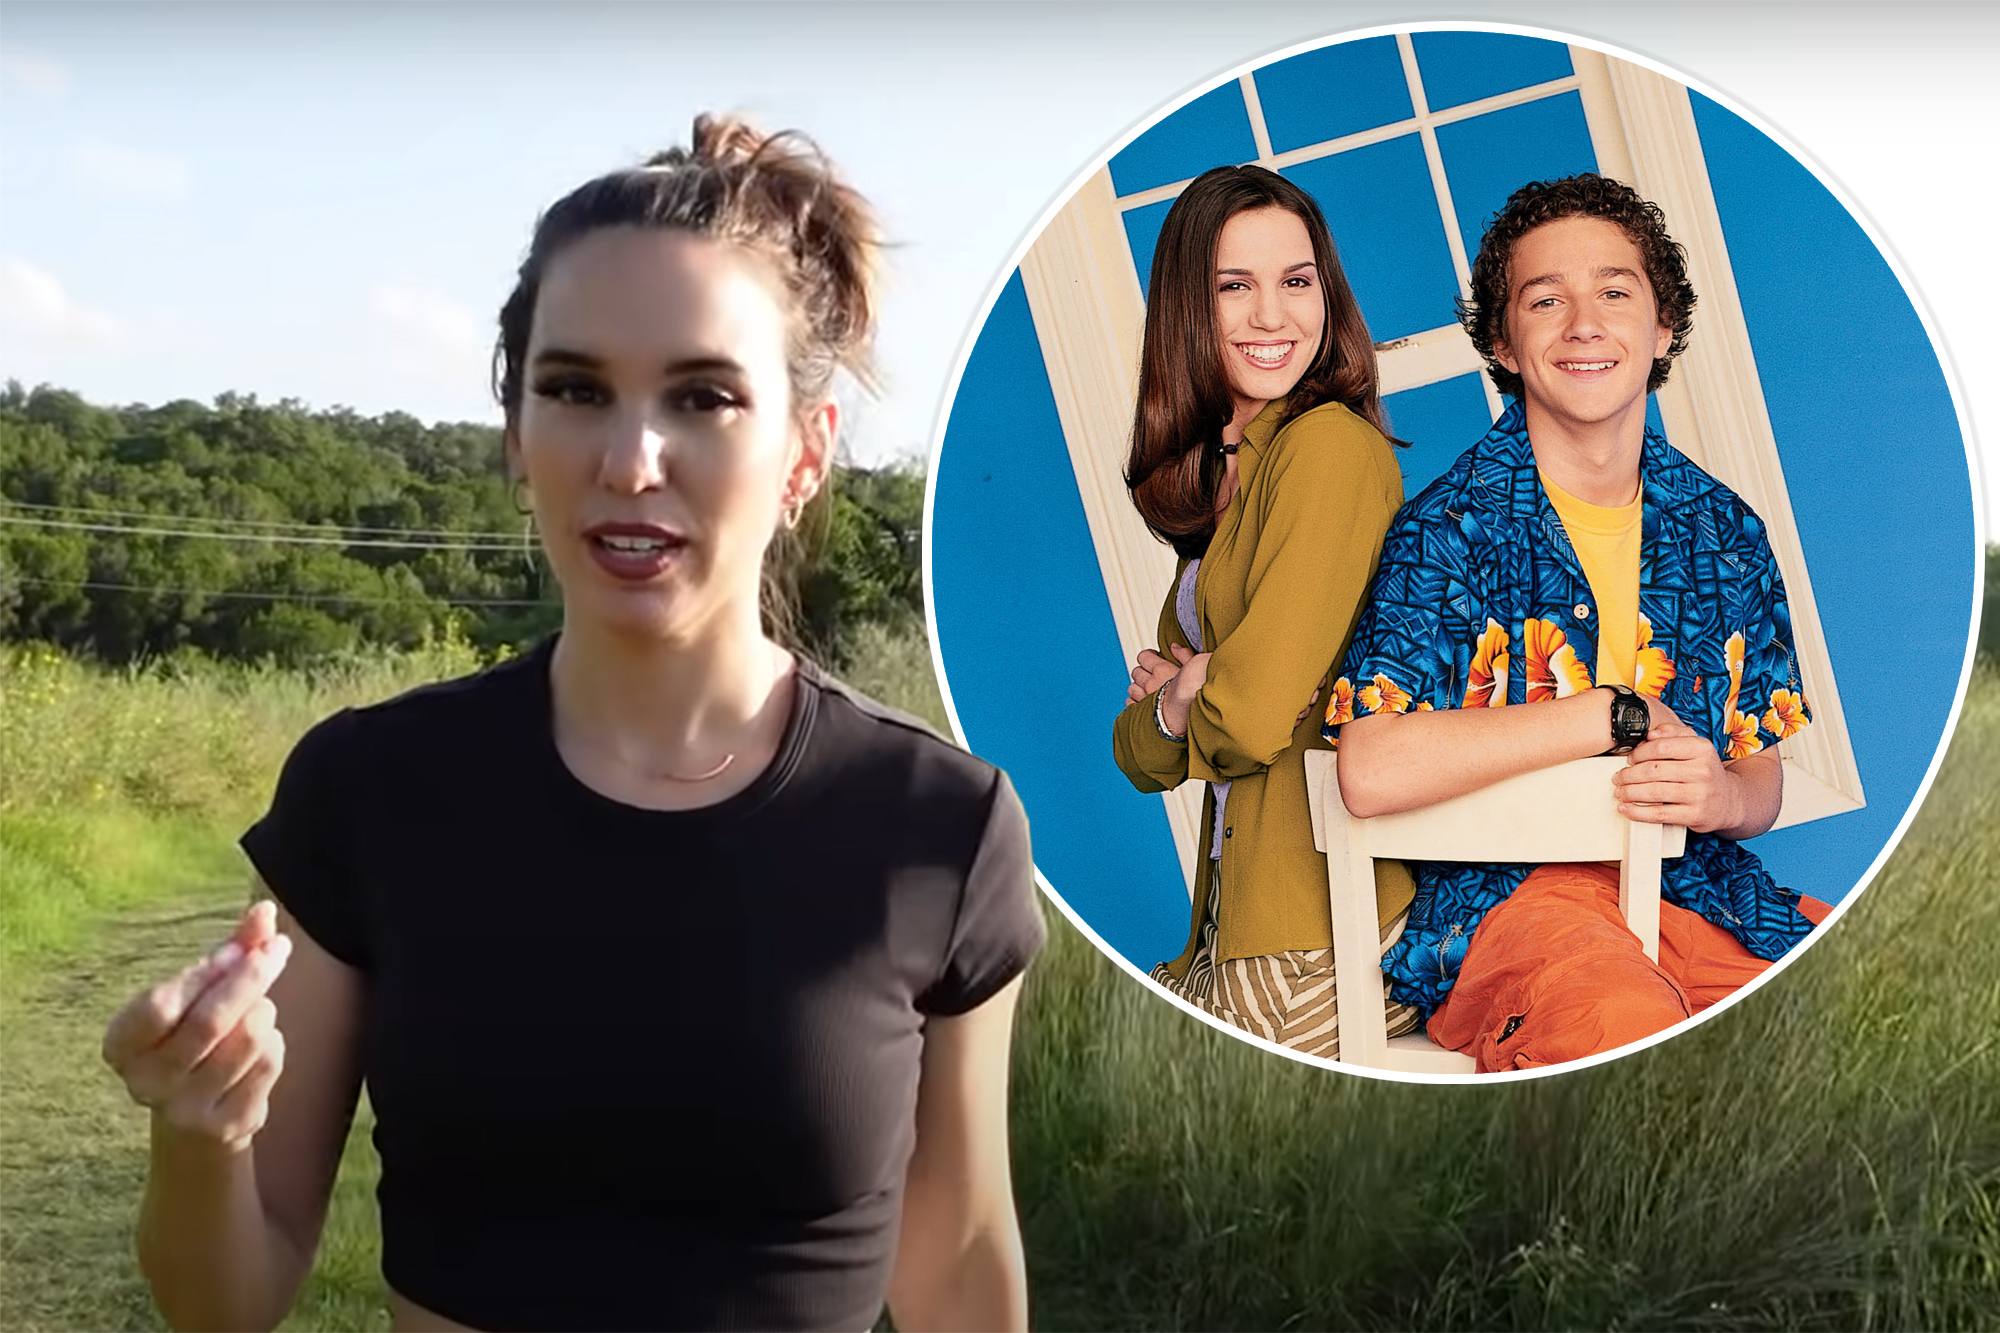 brian songhurst recommends christy carlson romano shower pic